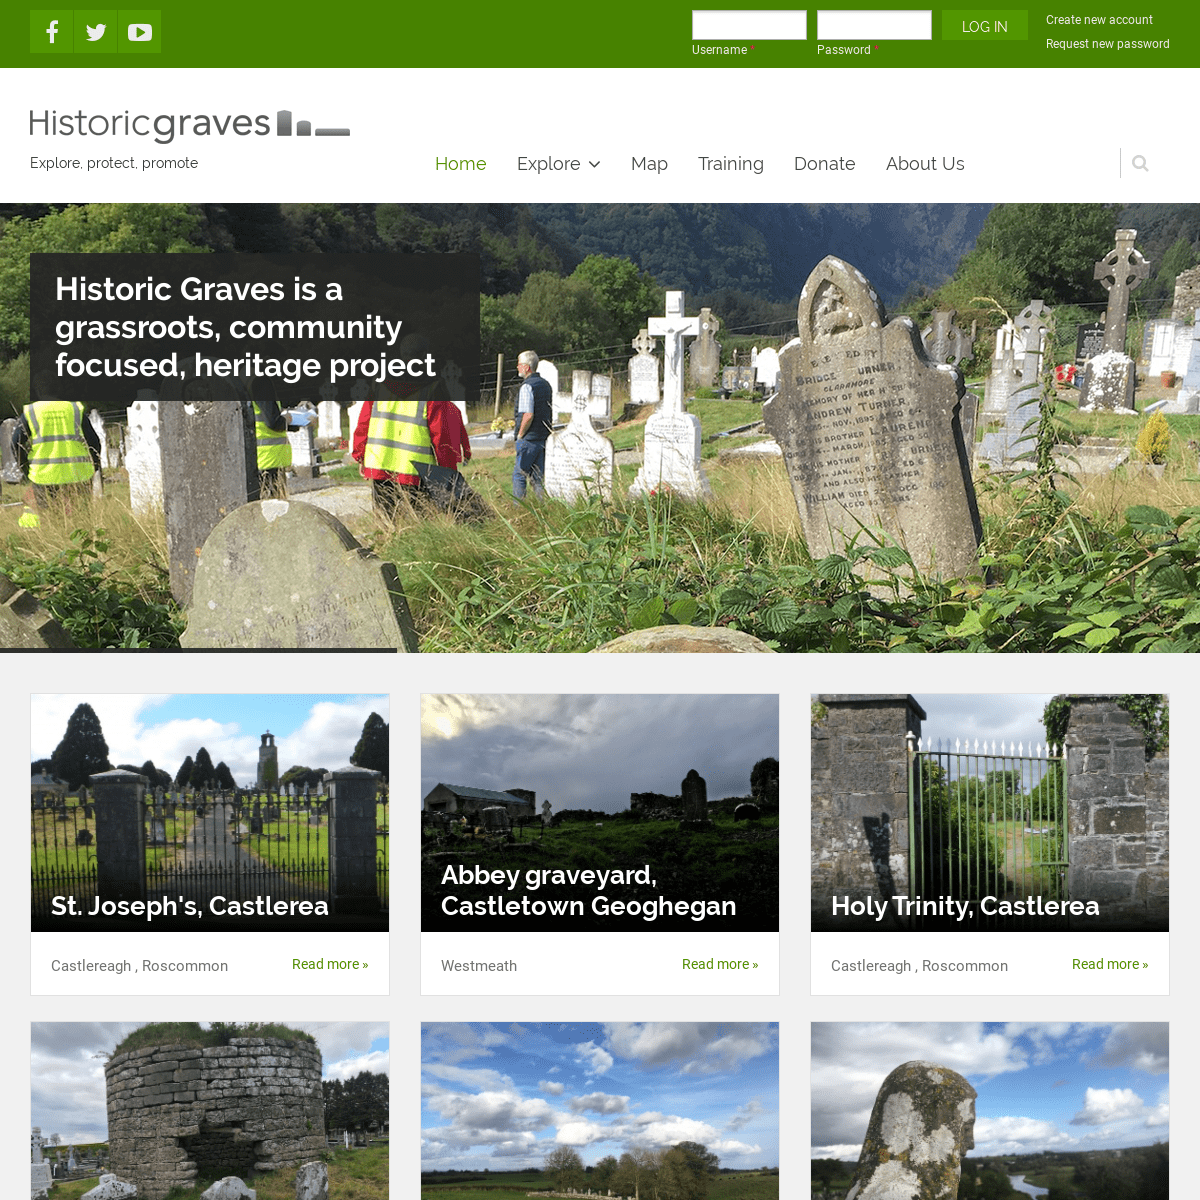 A complete backup of historicgraves.com